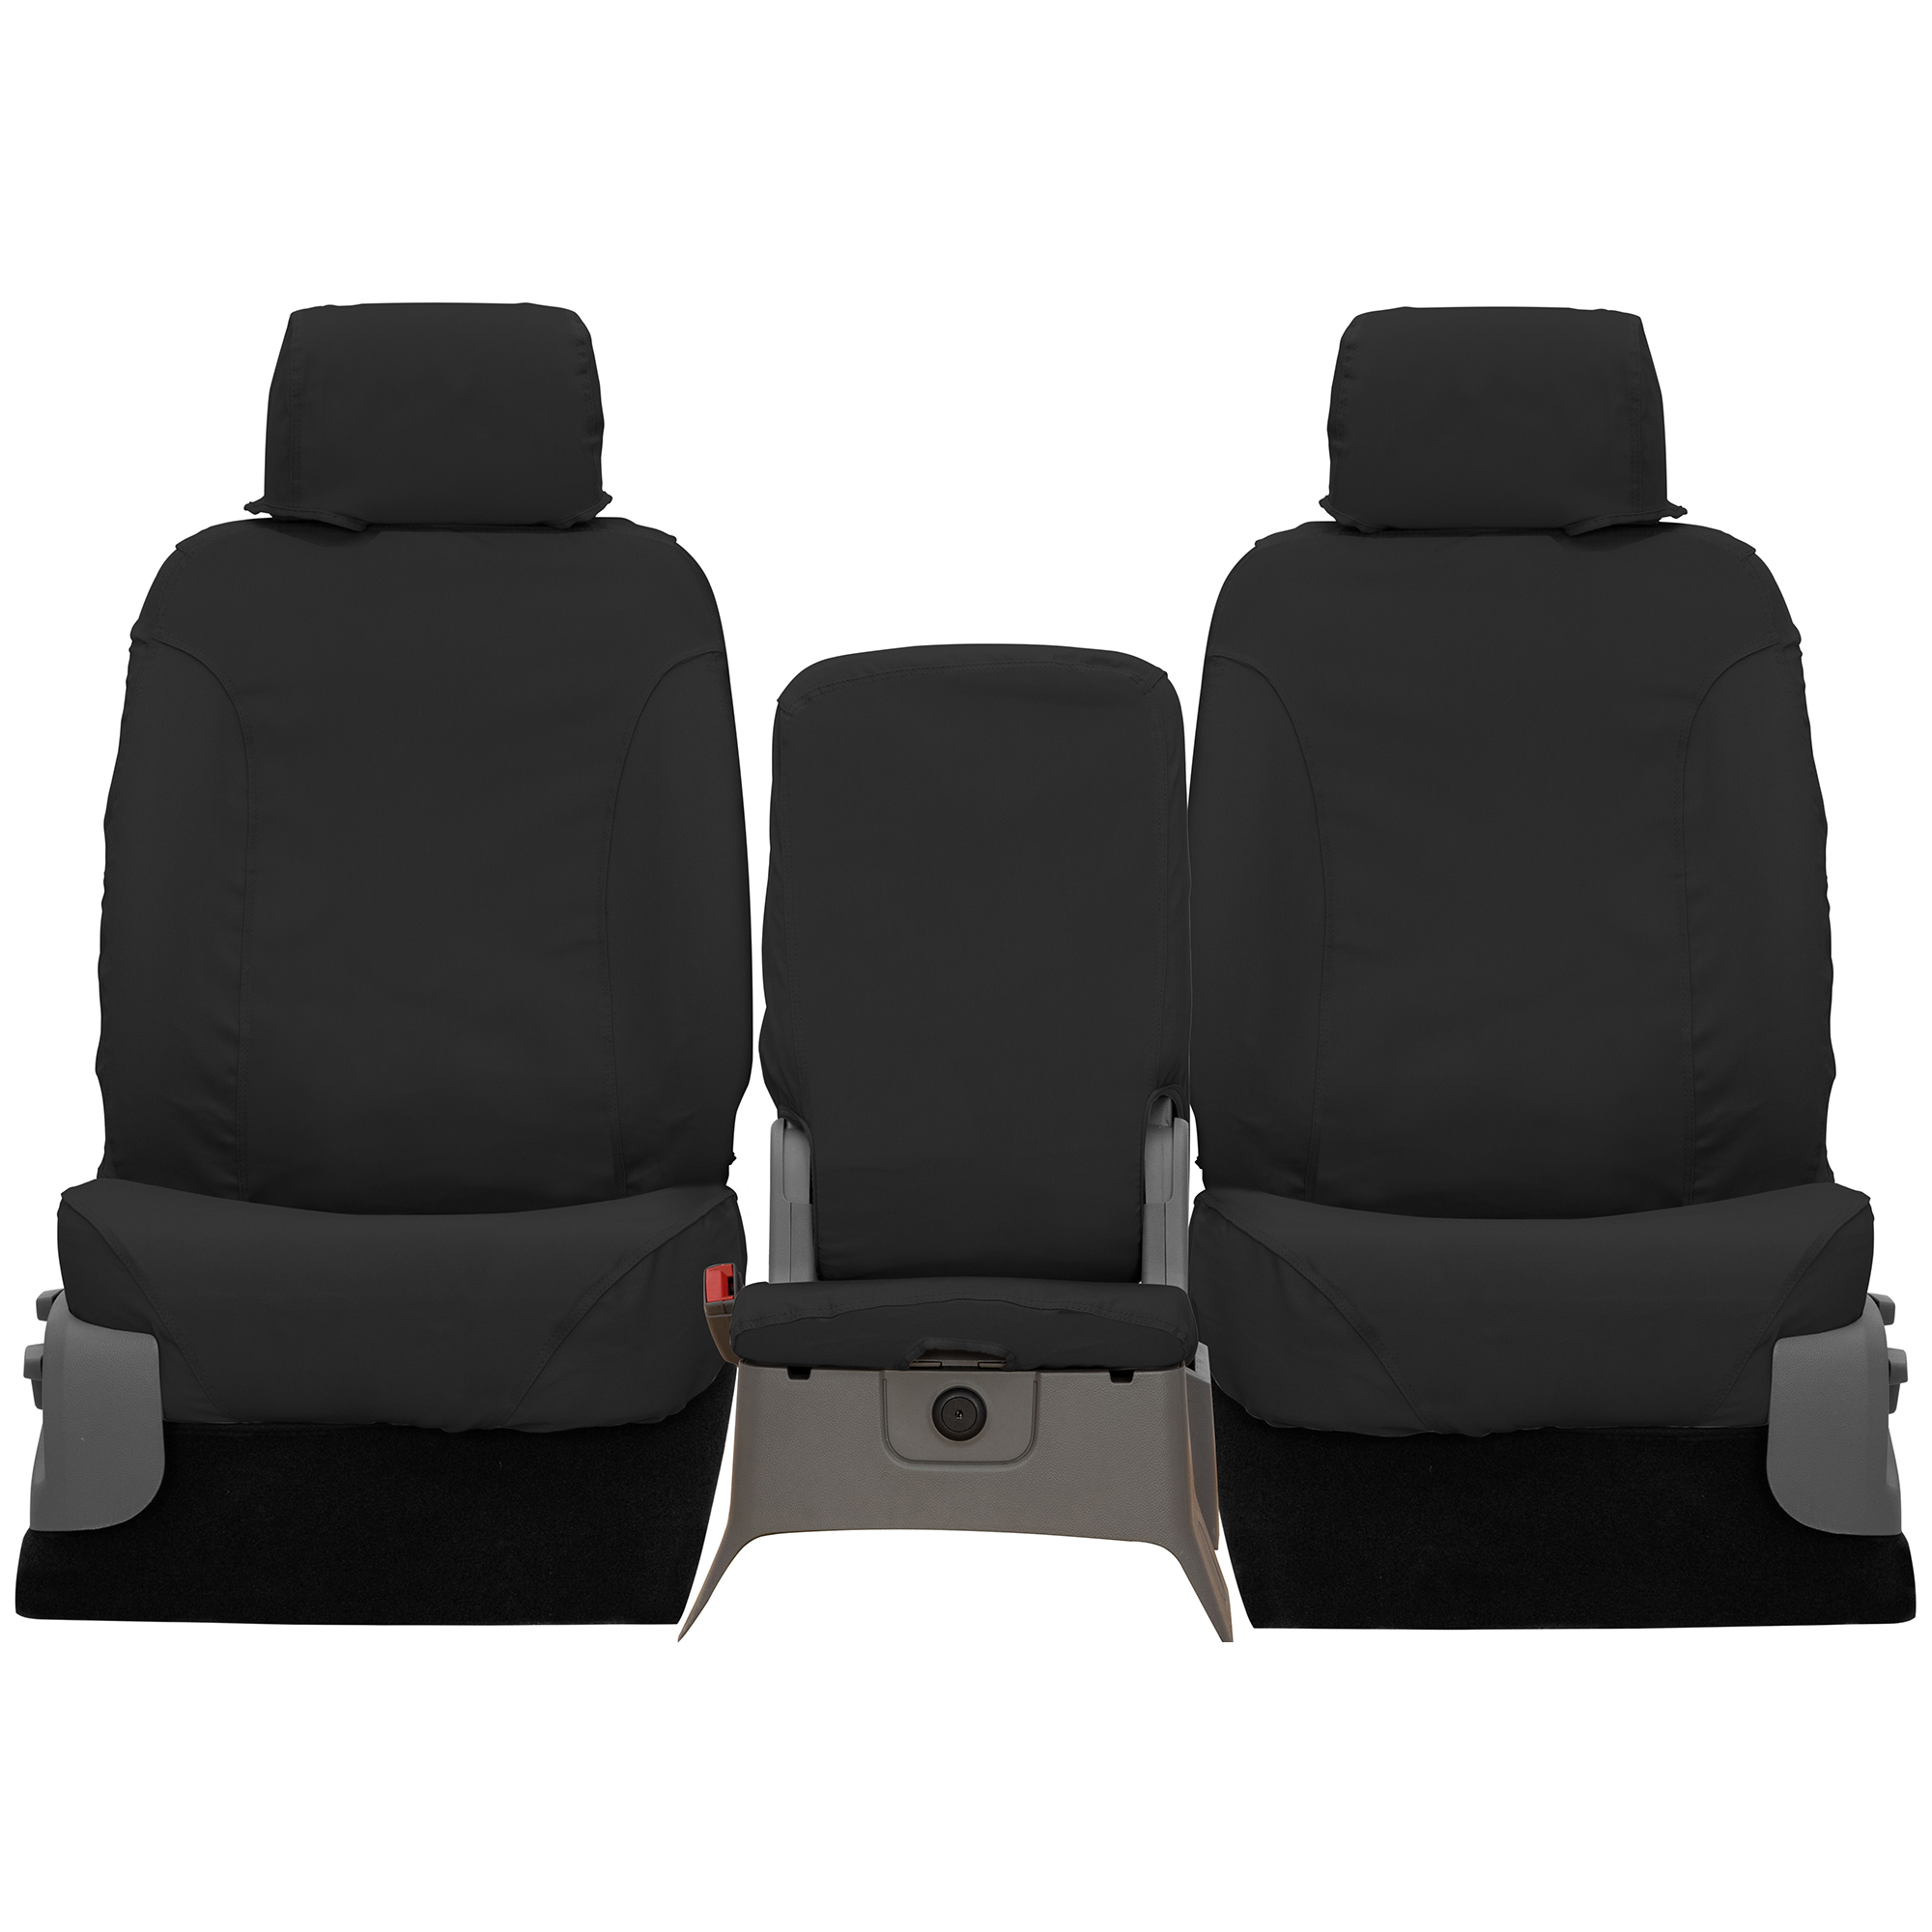 Covercraft Polycotton SeatSaver Custom Seat Covers for Ford F-150/F-250/F-350/F-450/F-550 Models - image 3 of 7